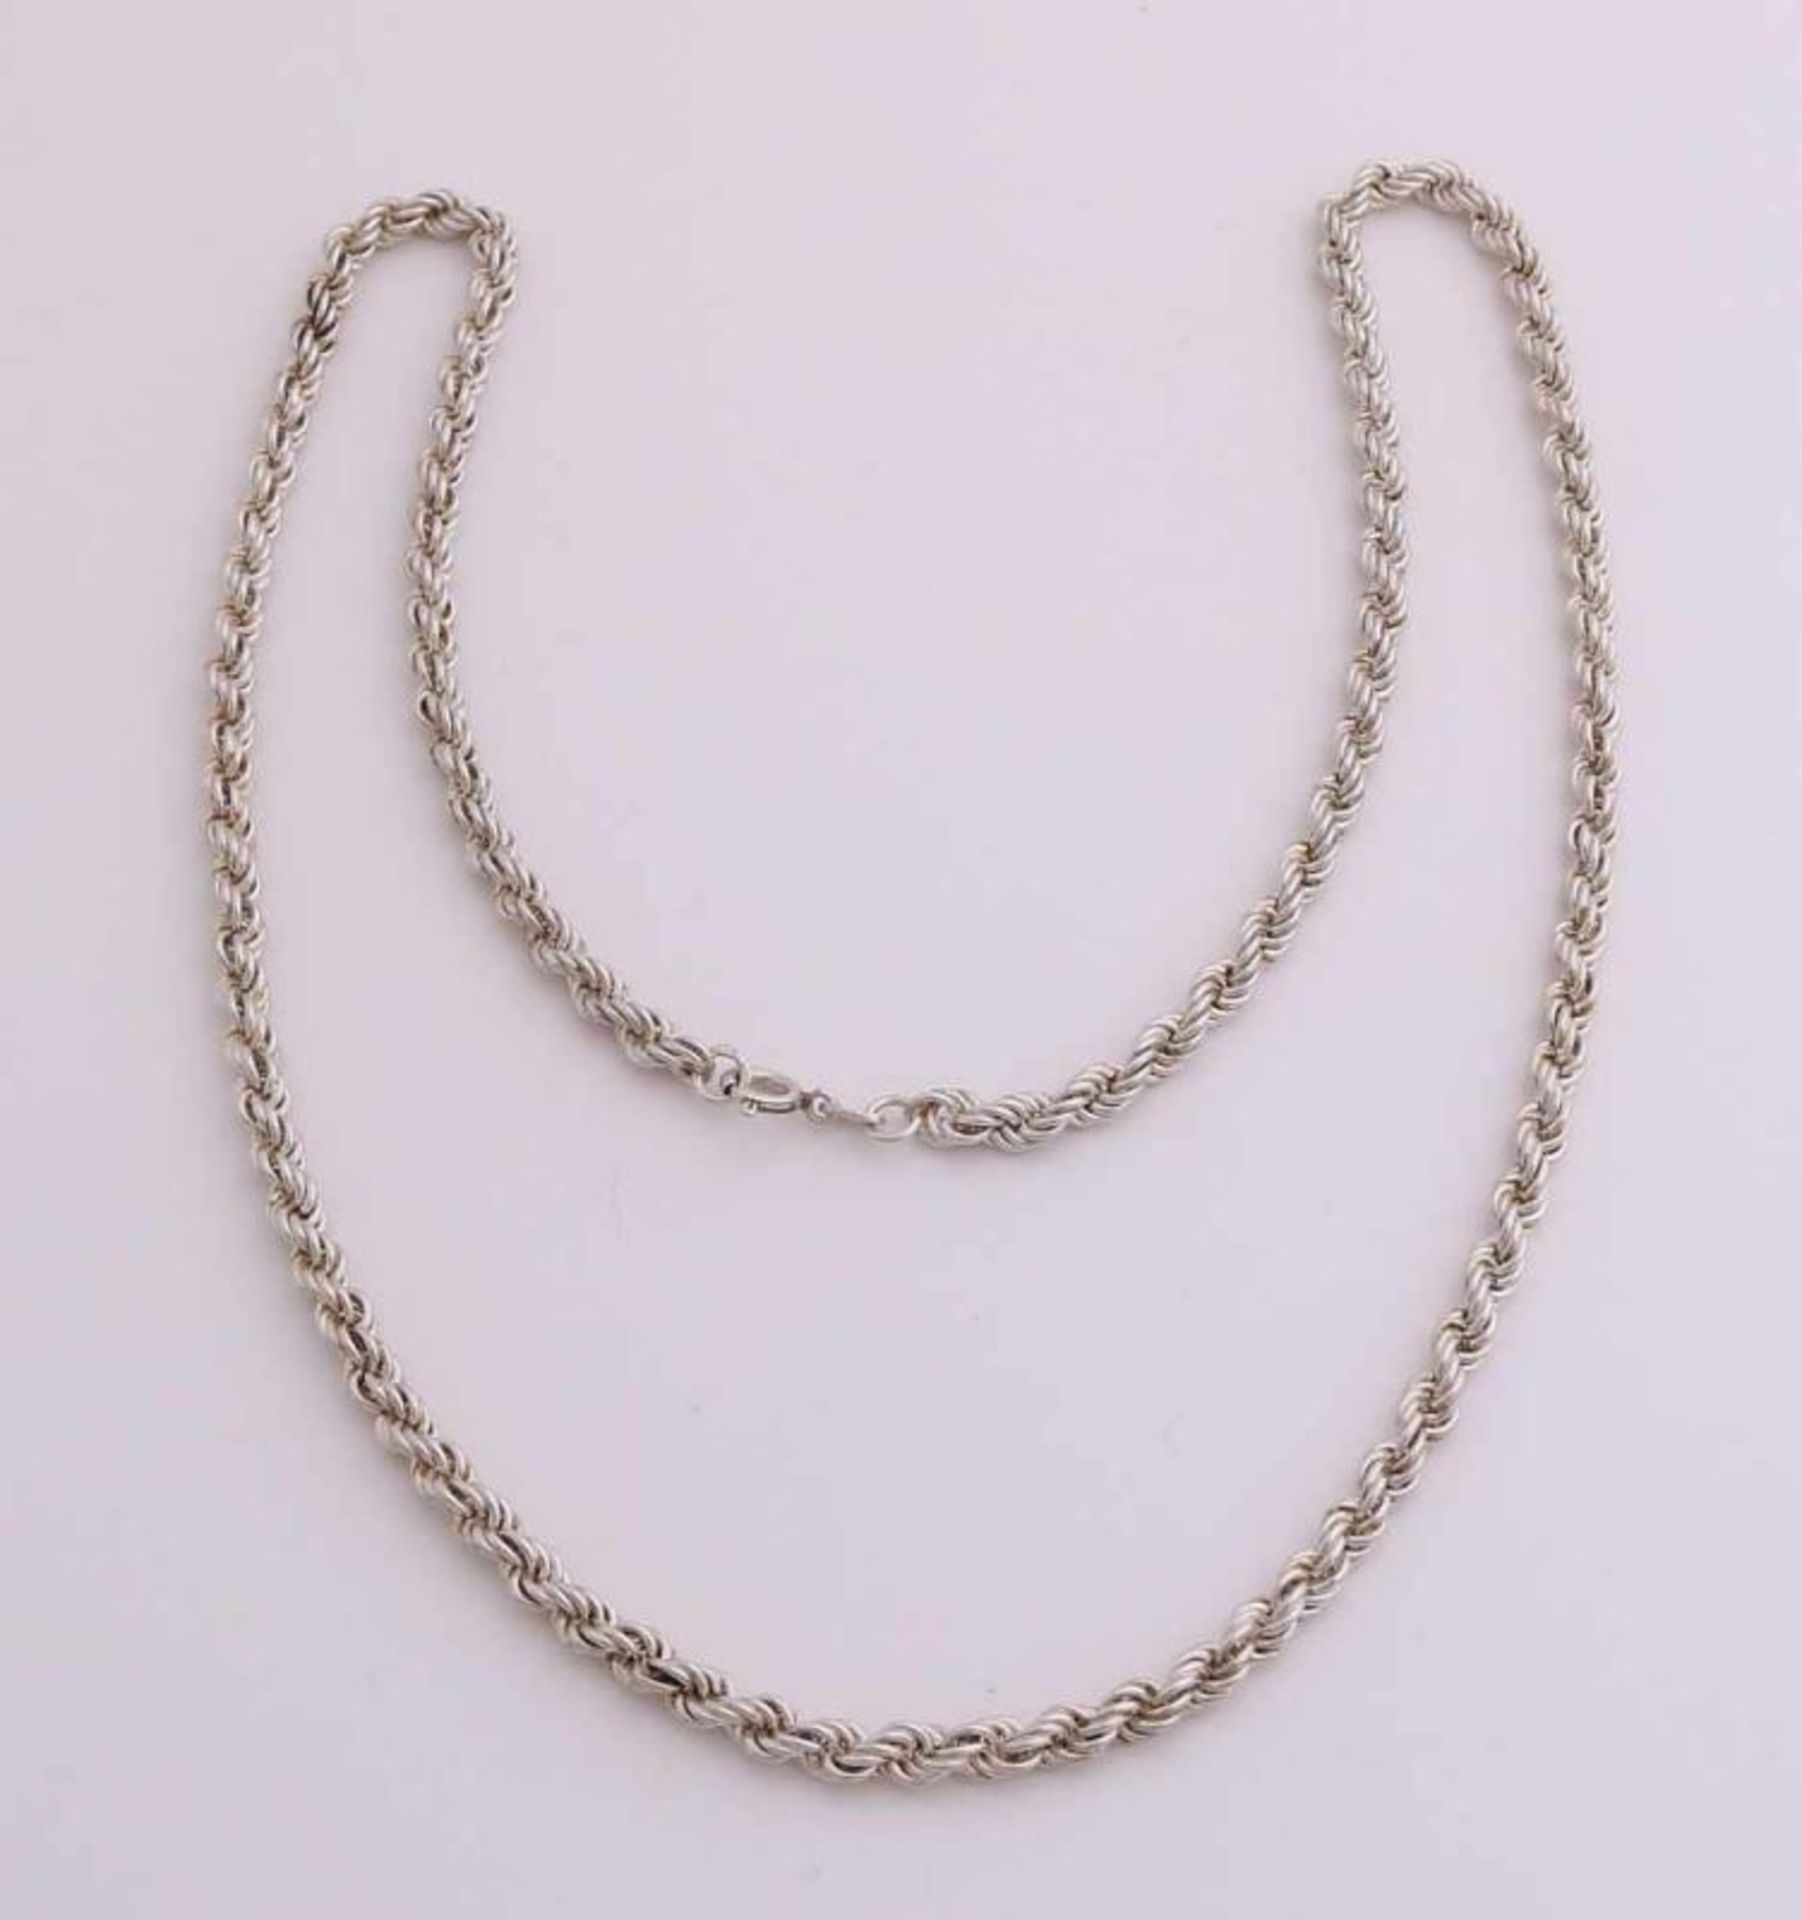 Silver cord necklace, 925/000, provided with spring eye. ø4,5mm. 60 cm. approximately 38 grams. In